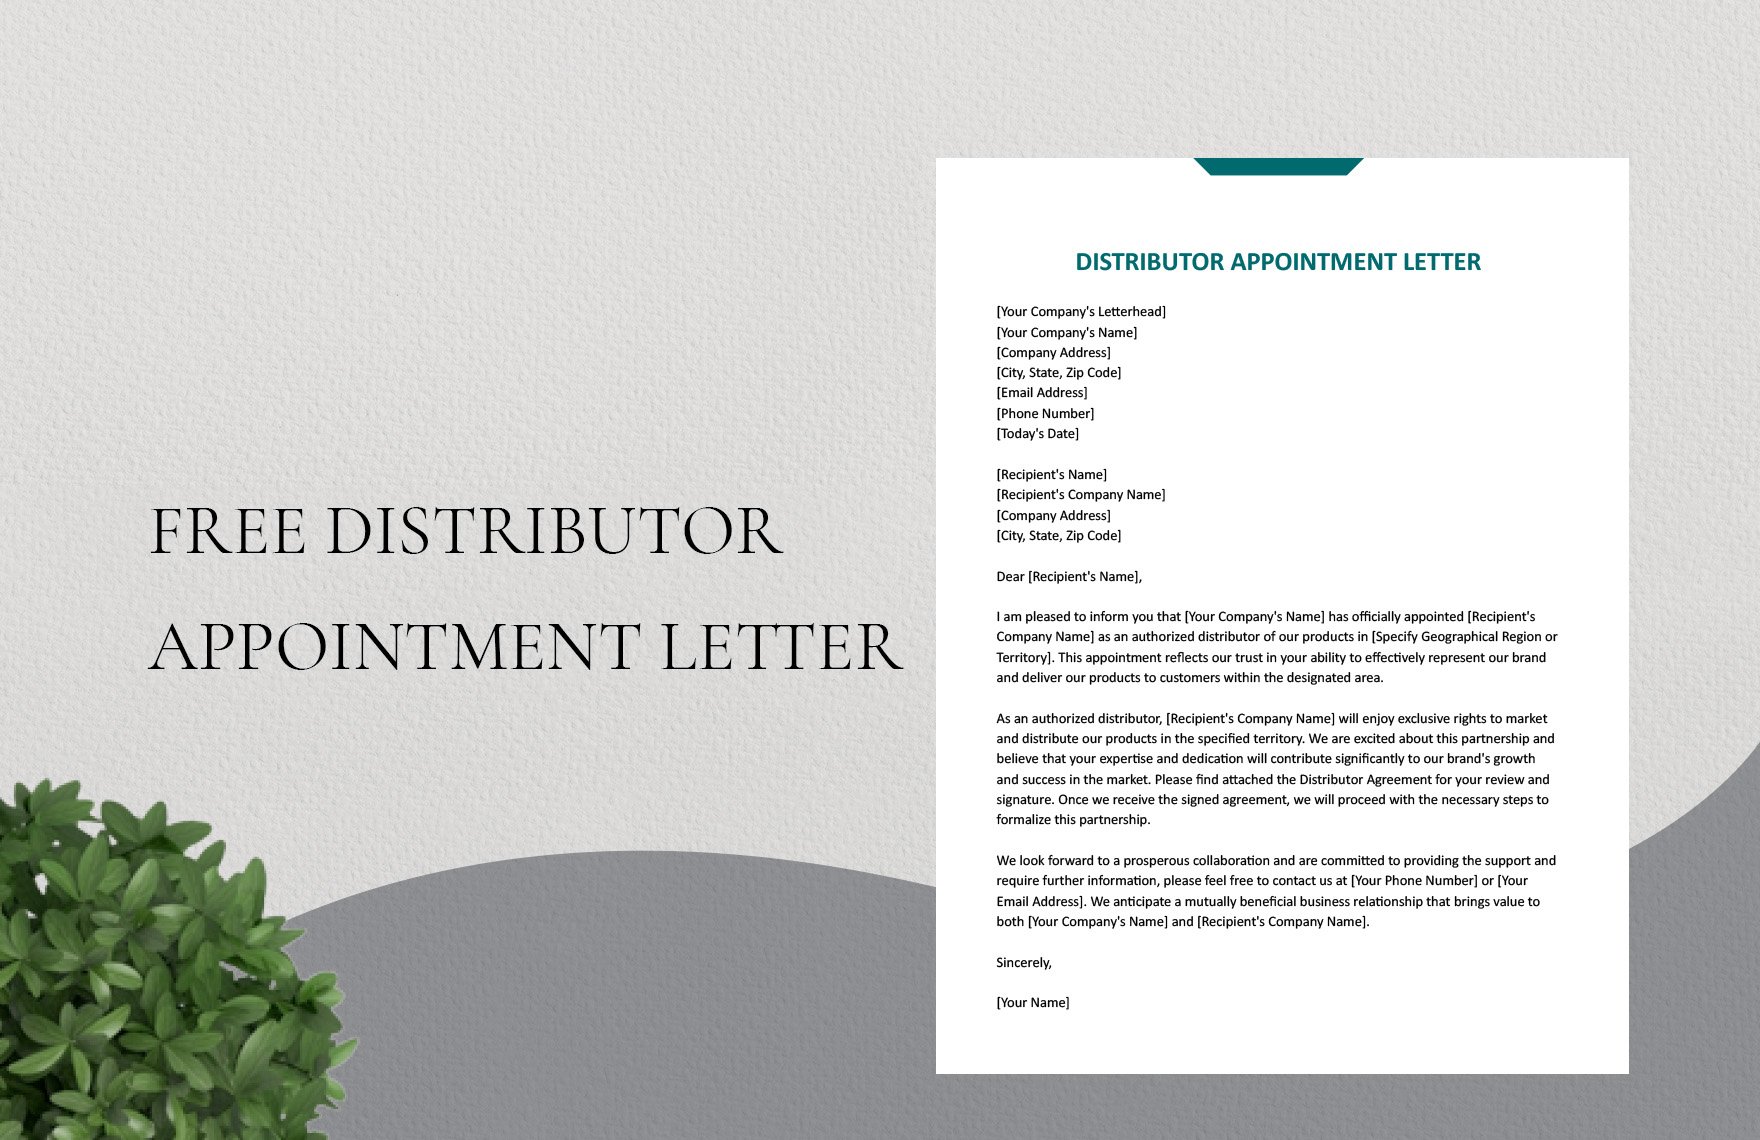 Distributor Appointment Letter